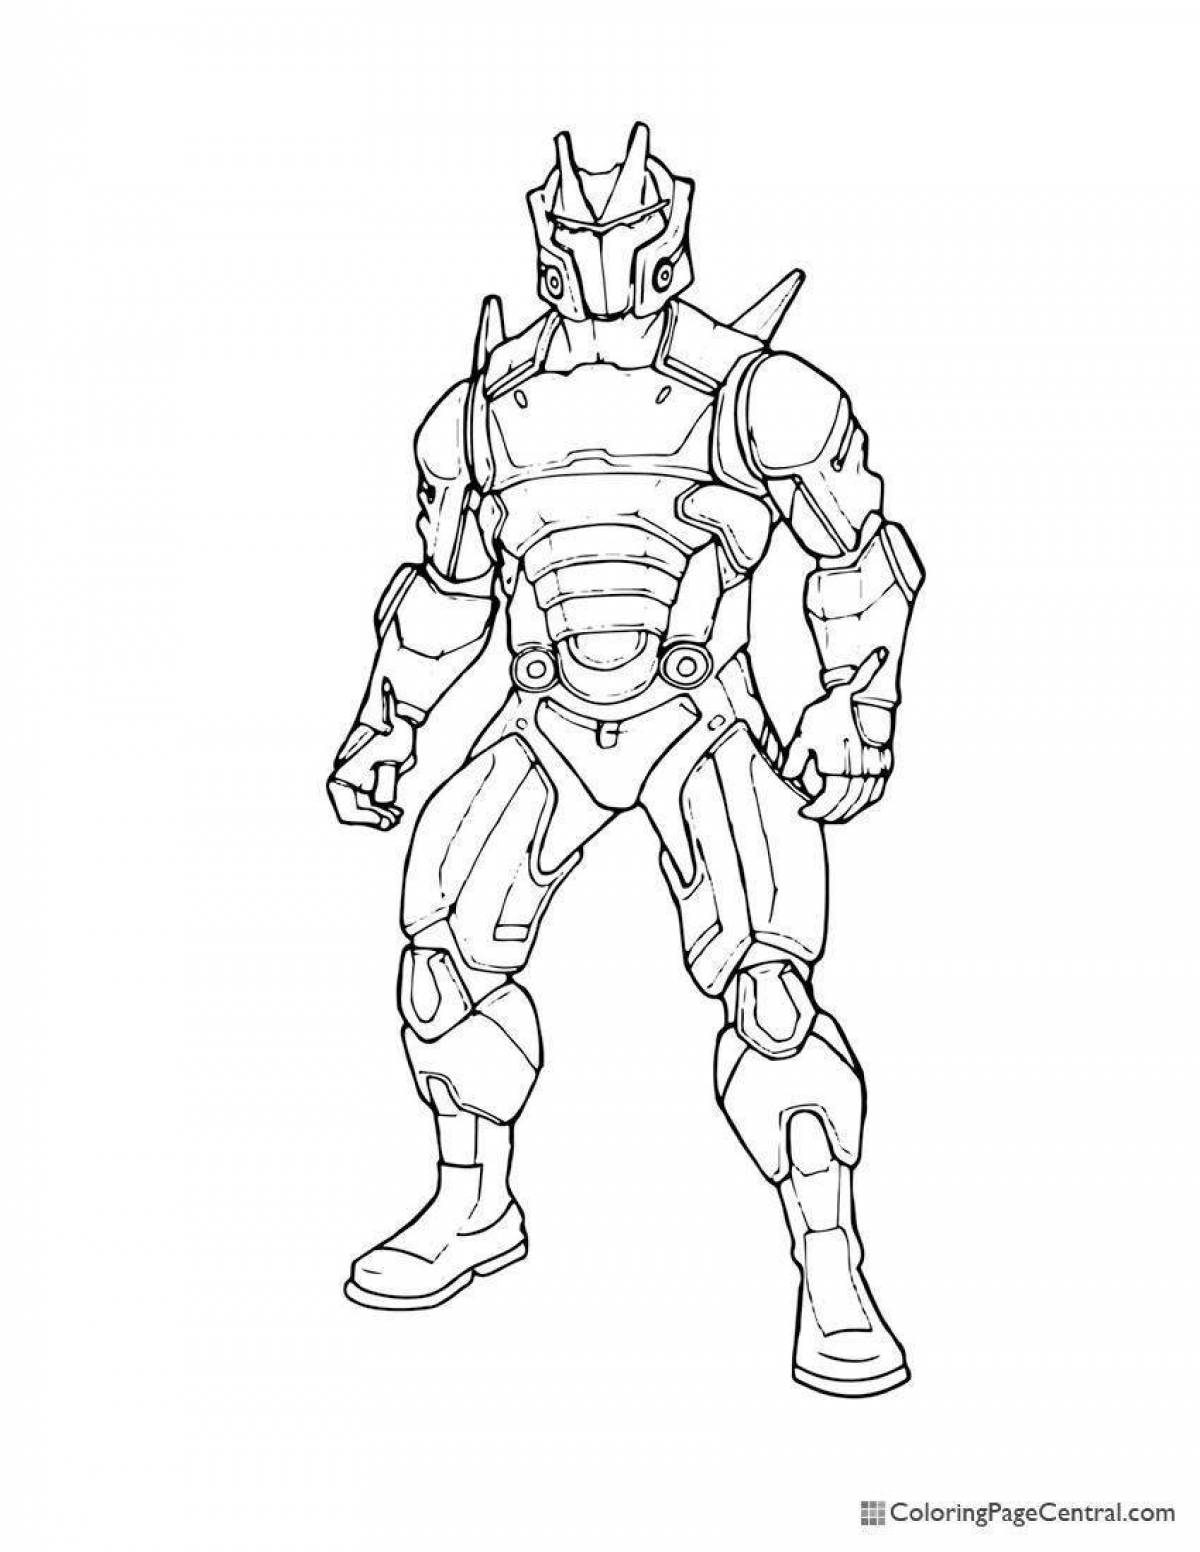 Shining fortnite coloring page